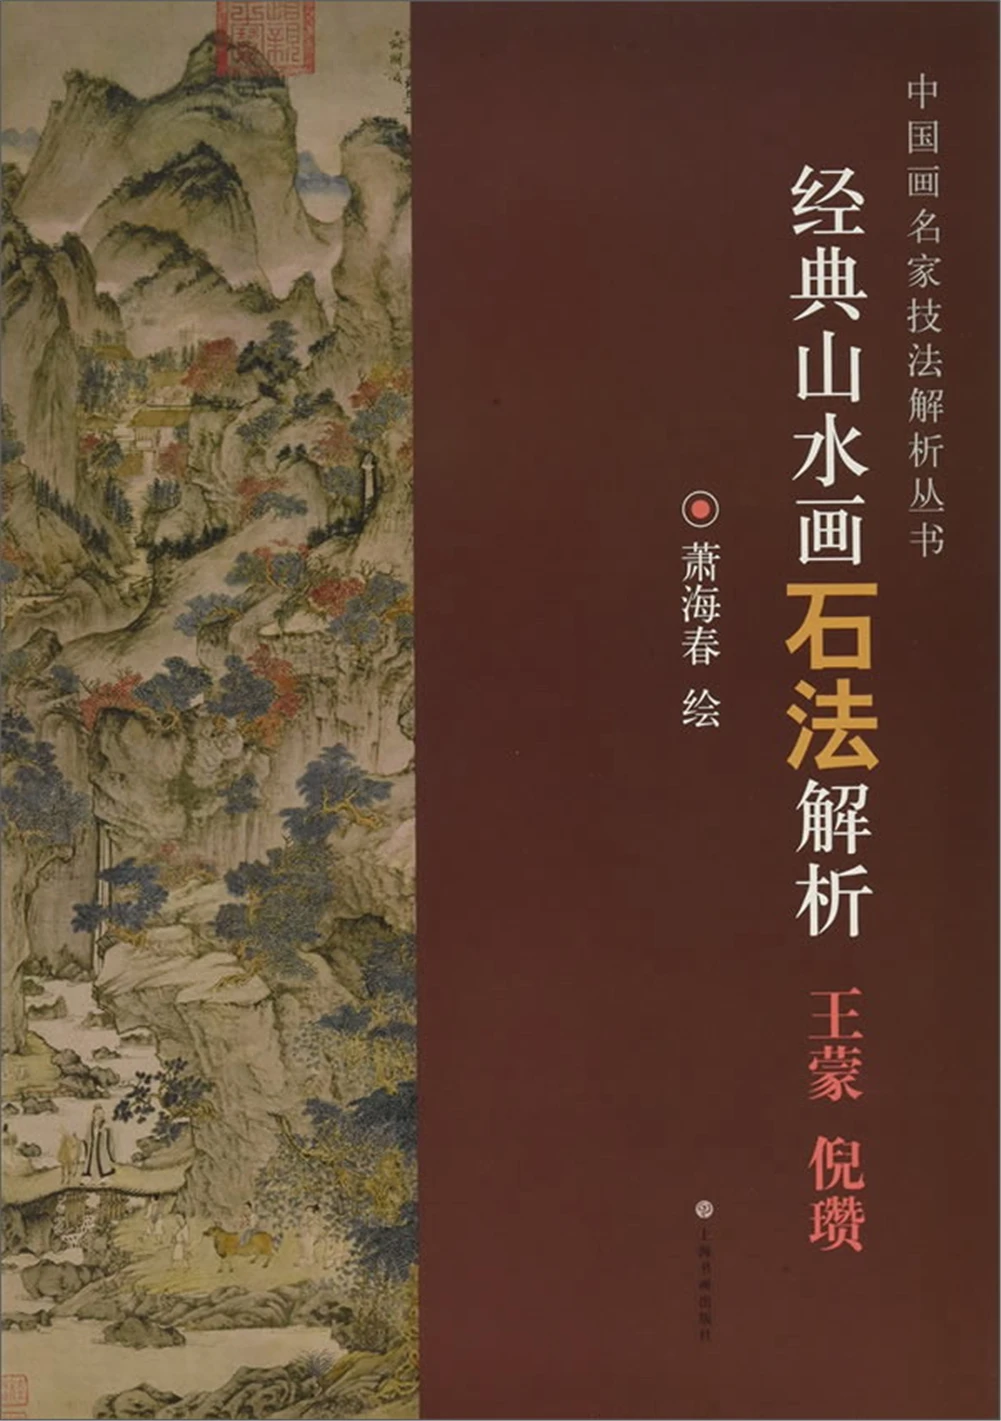 

Classical landscape painting and stone method analysis (Wang Meng, Ni Zan)/Chinese painting master technique analysis series